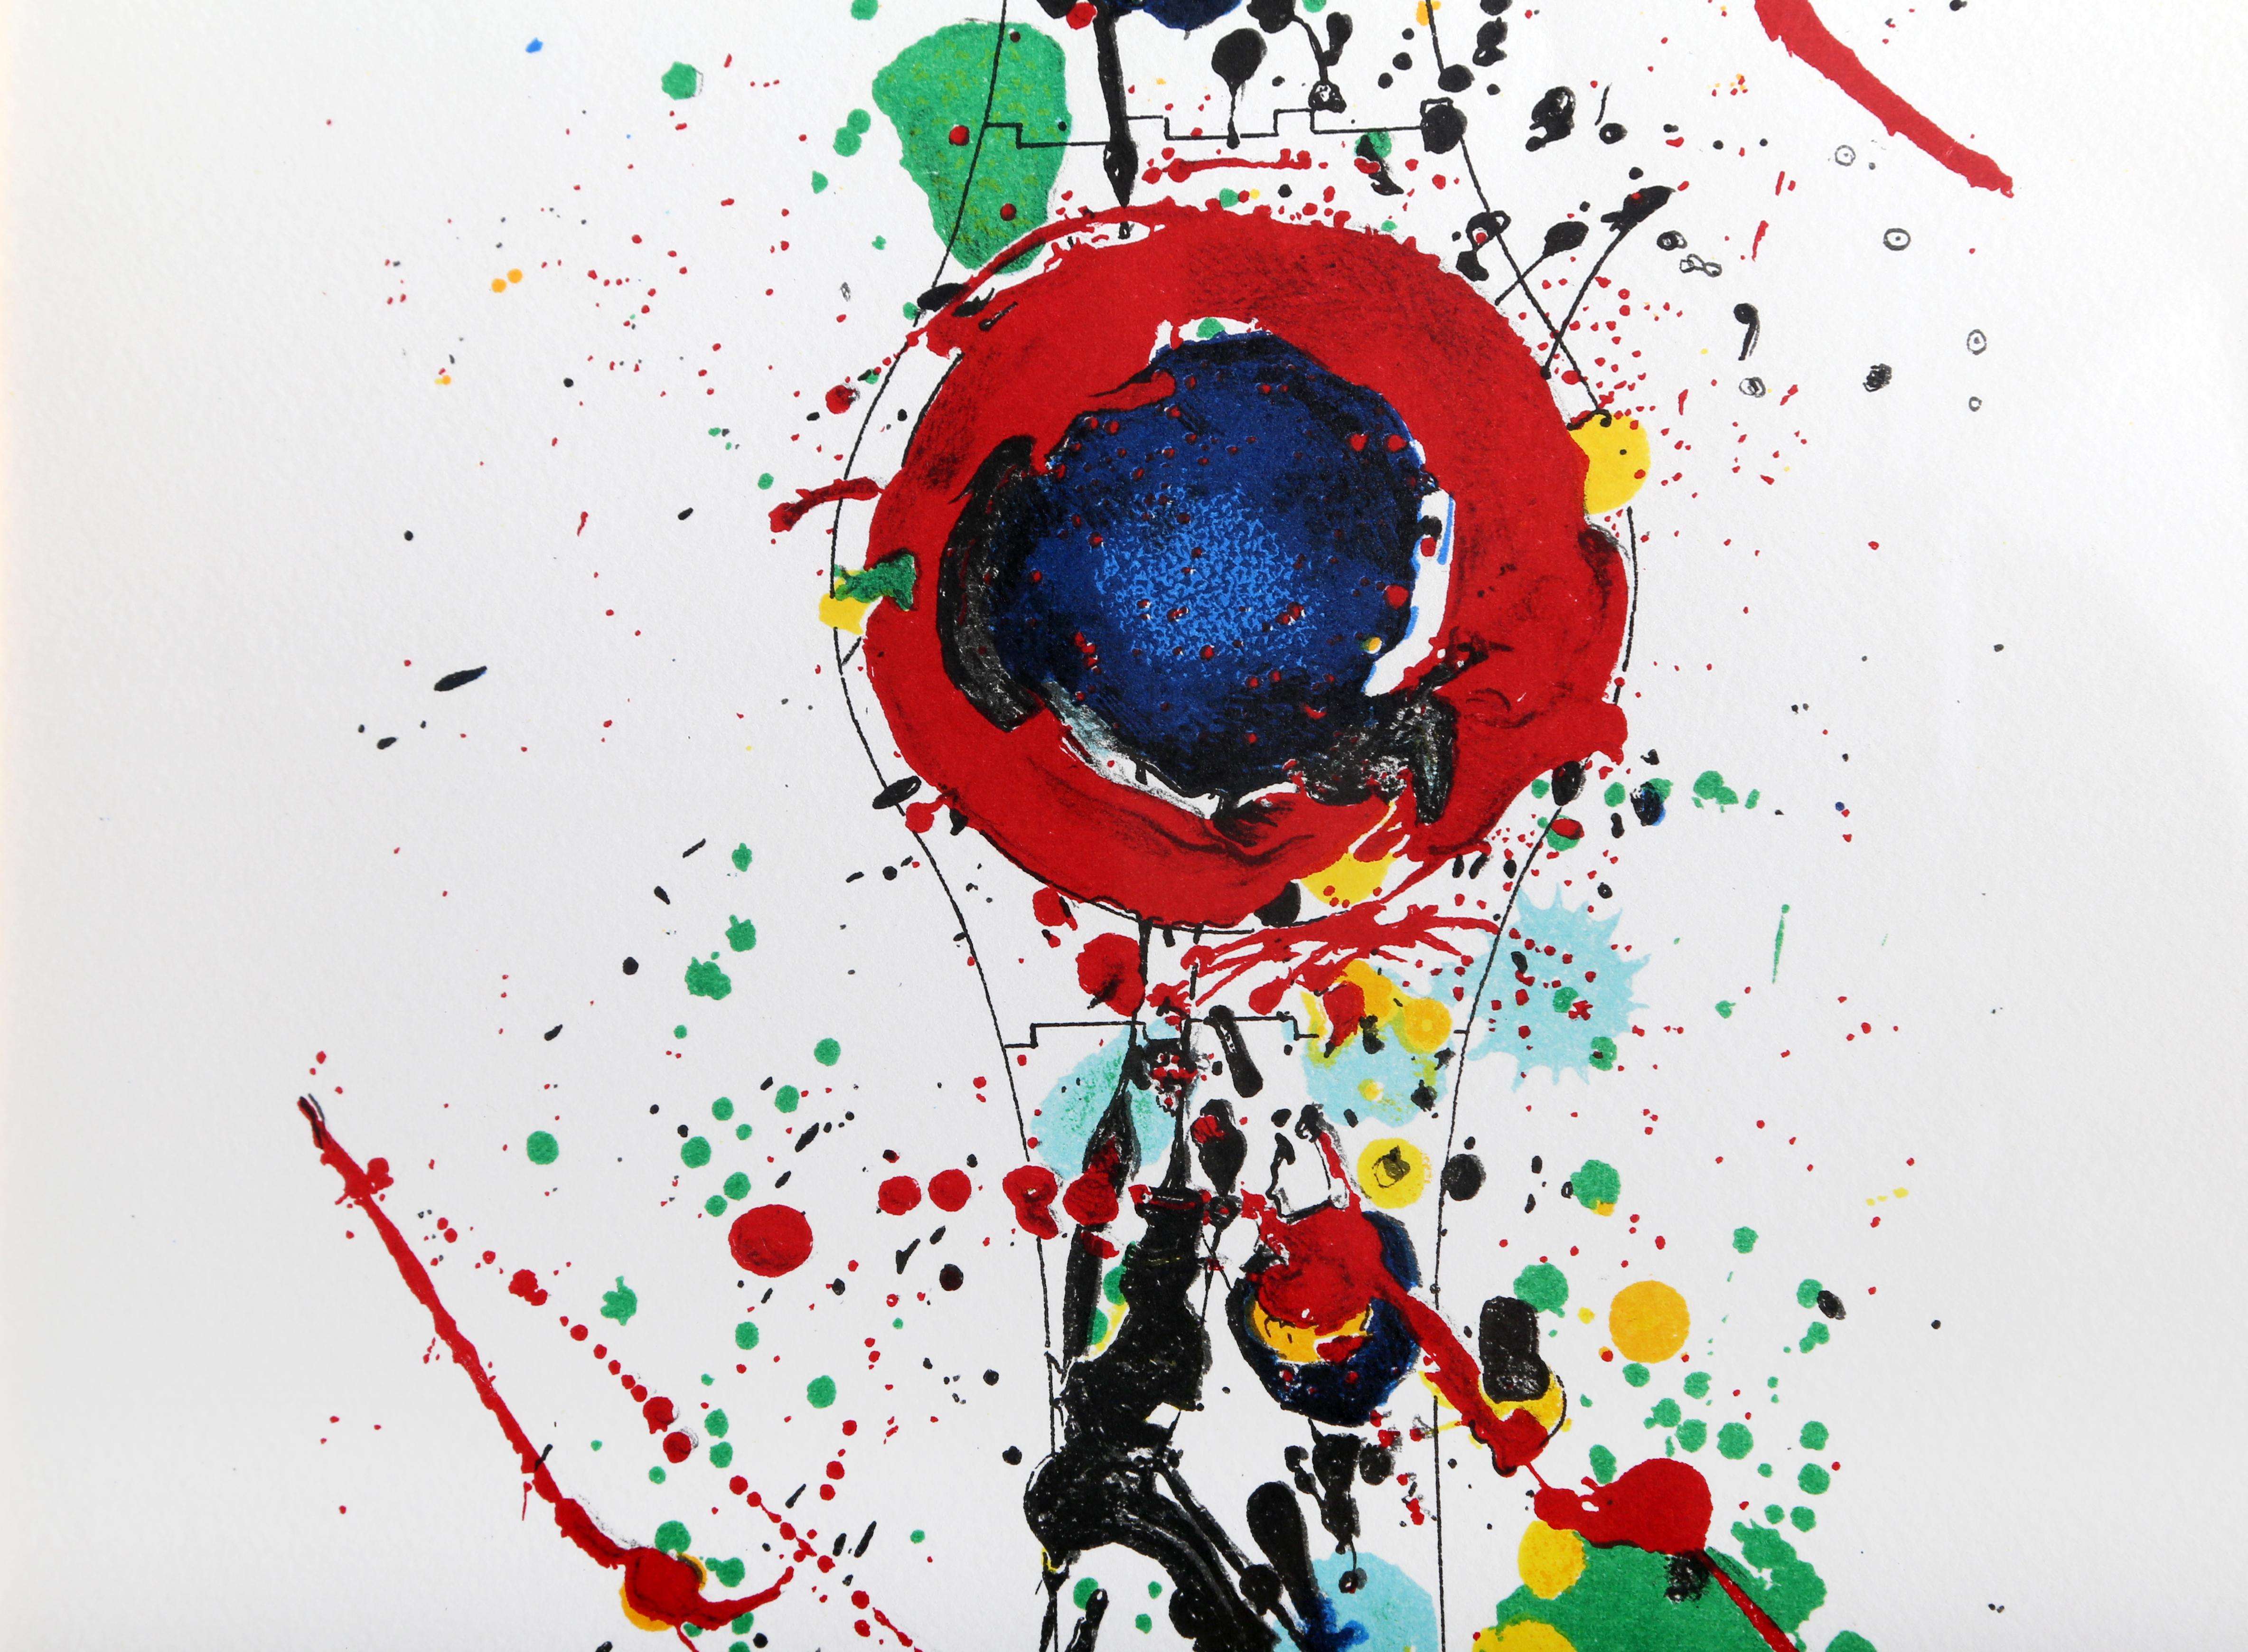 Swatch
Sam Francis, American (1923–1994)
Date: 1992
Lithograph, signed and numbered in pencil
Edition of EA 19/50
Size: 30 x 8 in. (76.2 x 20.32 cm)
Frame Size: 43 x 21 inches
Printer: Mourlot, Paris